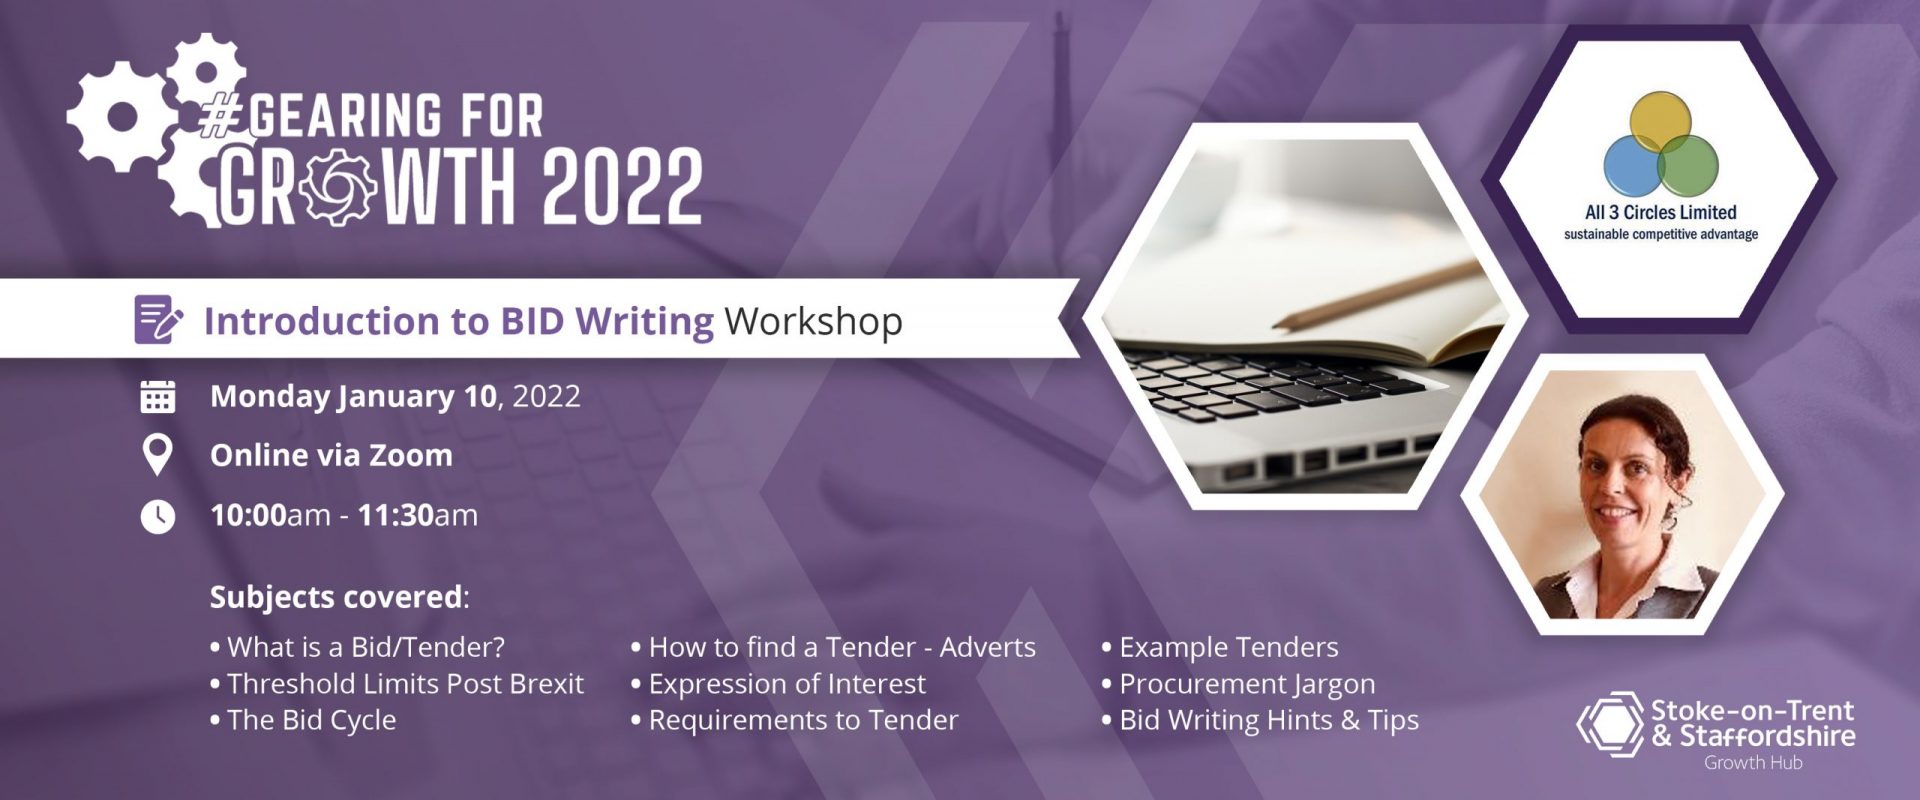 #GEARINGFORGROWTH2022: Introduction to BID Writing Workshop - CPD Accredited